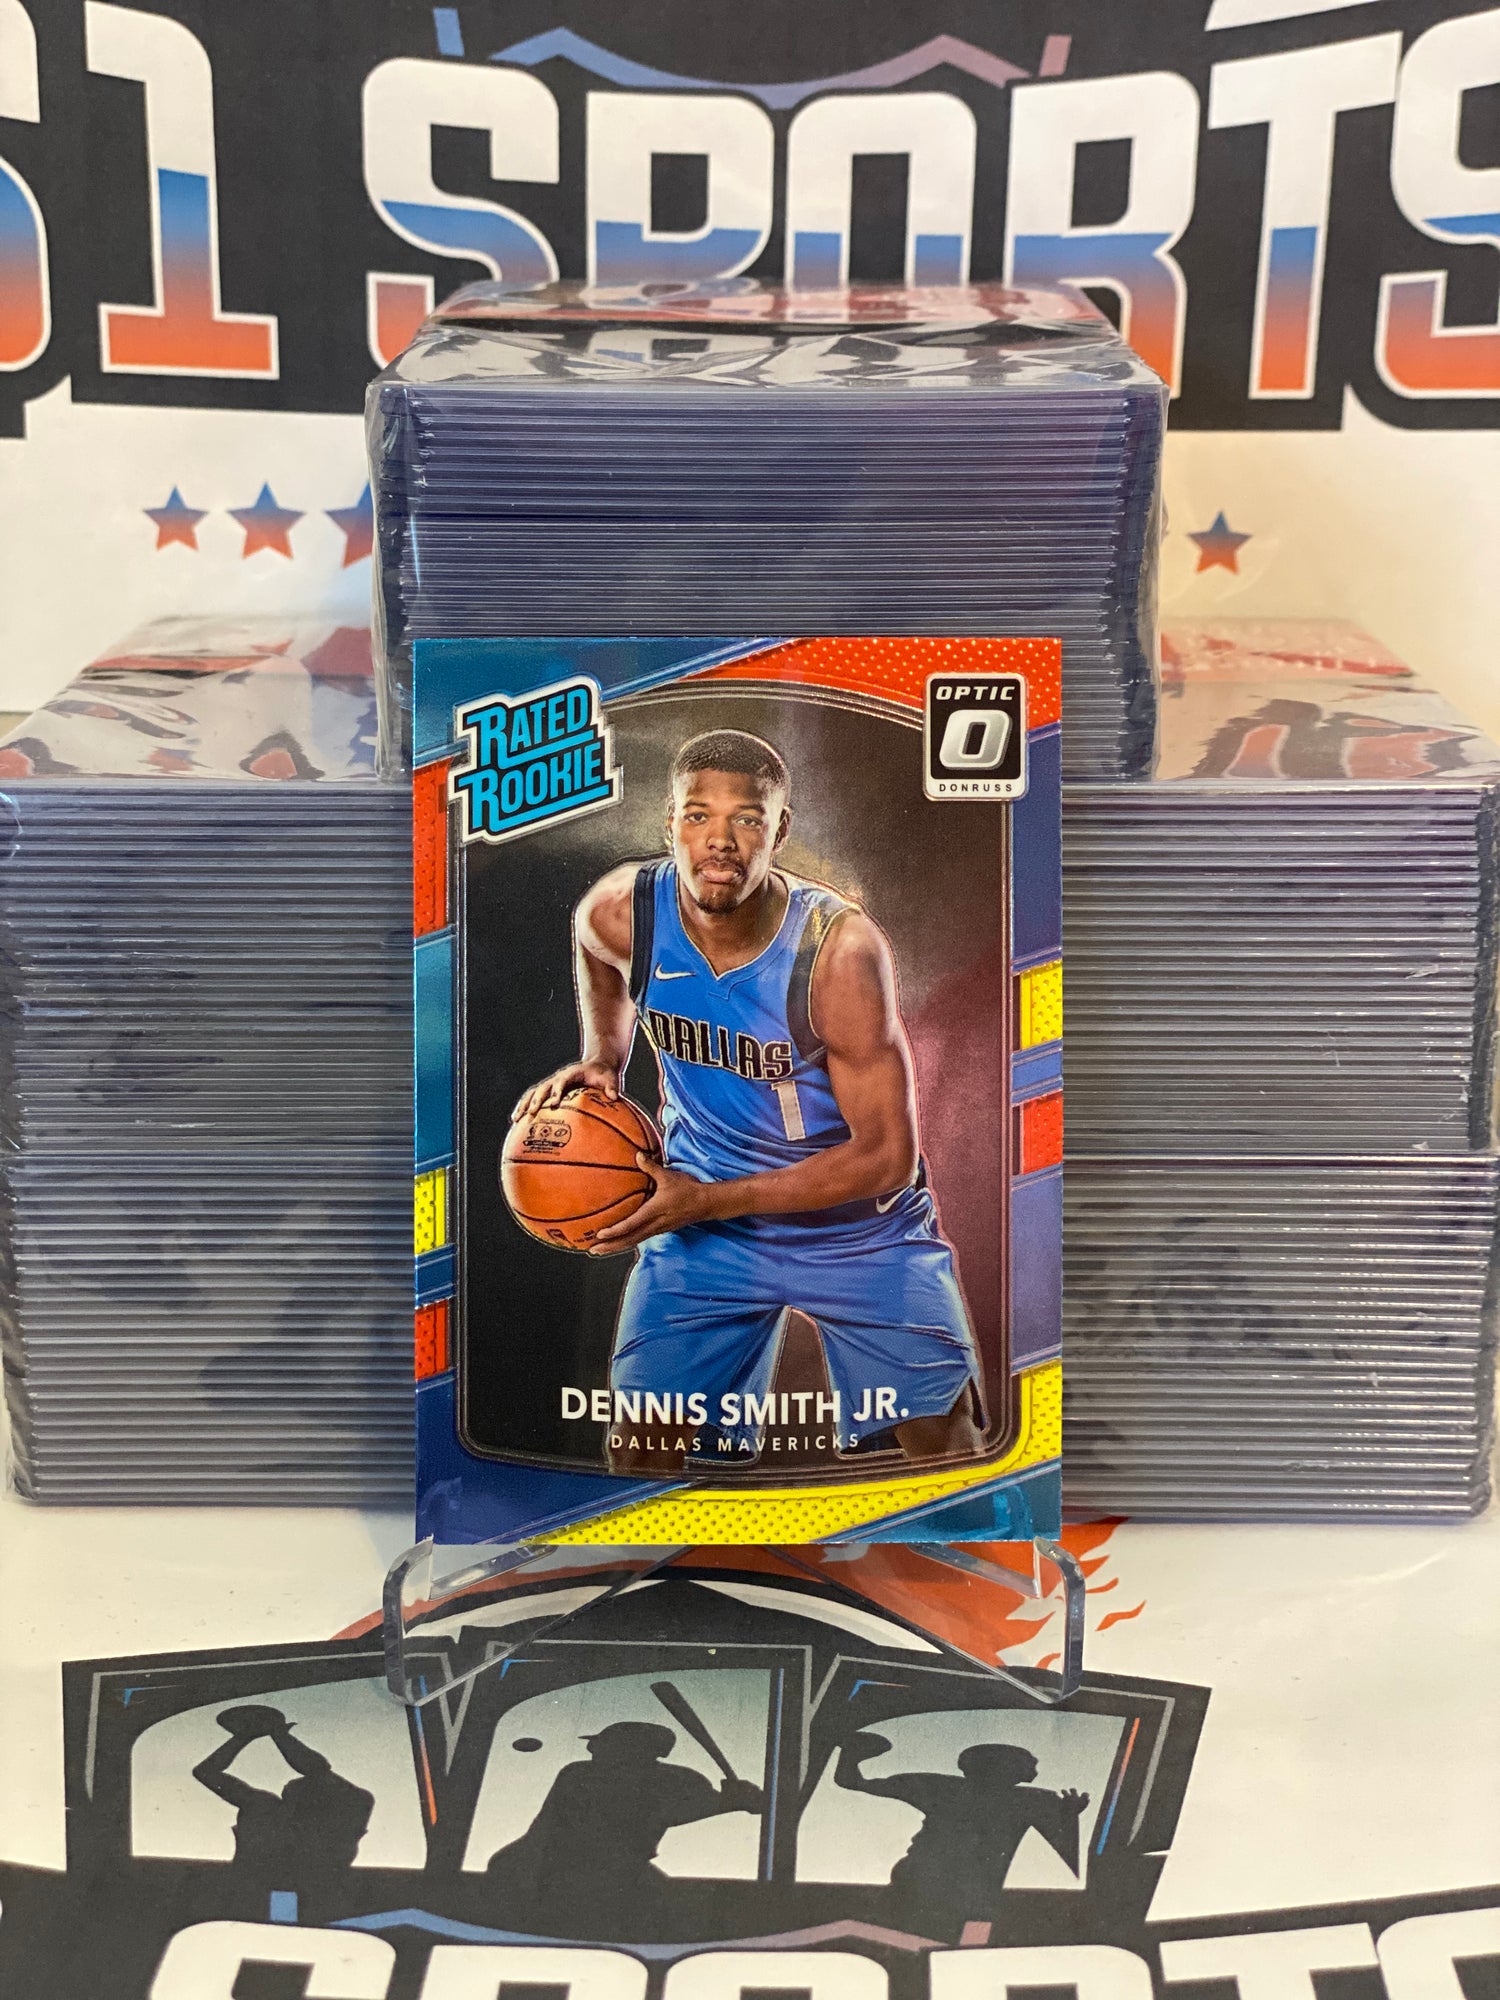 2017 Donruss Optic (Mega Red Yellow, Rated Rookie) Dennis Smith Jr. #192